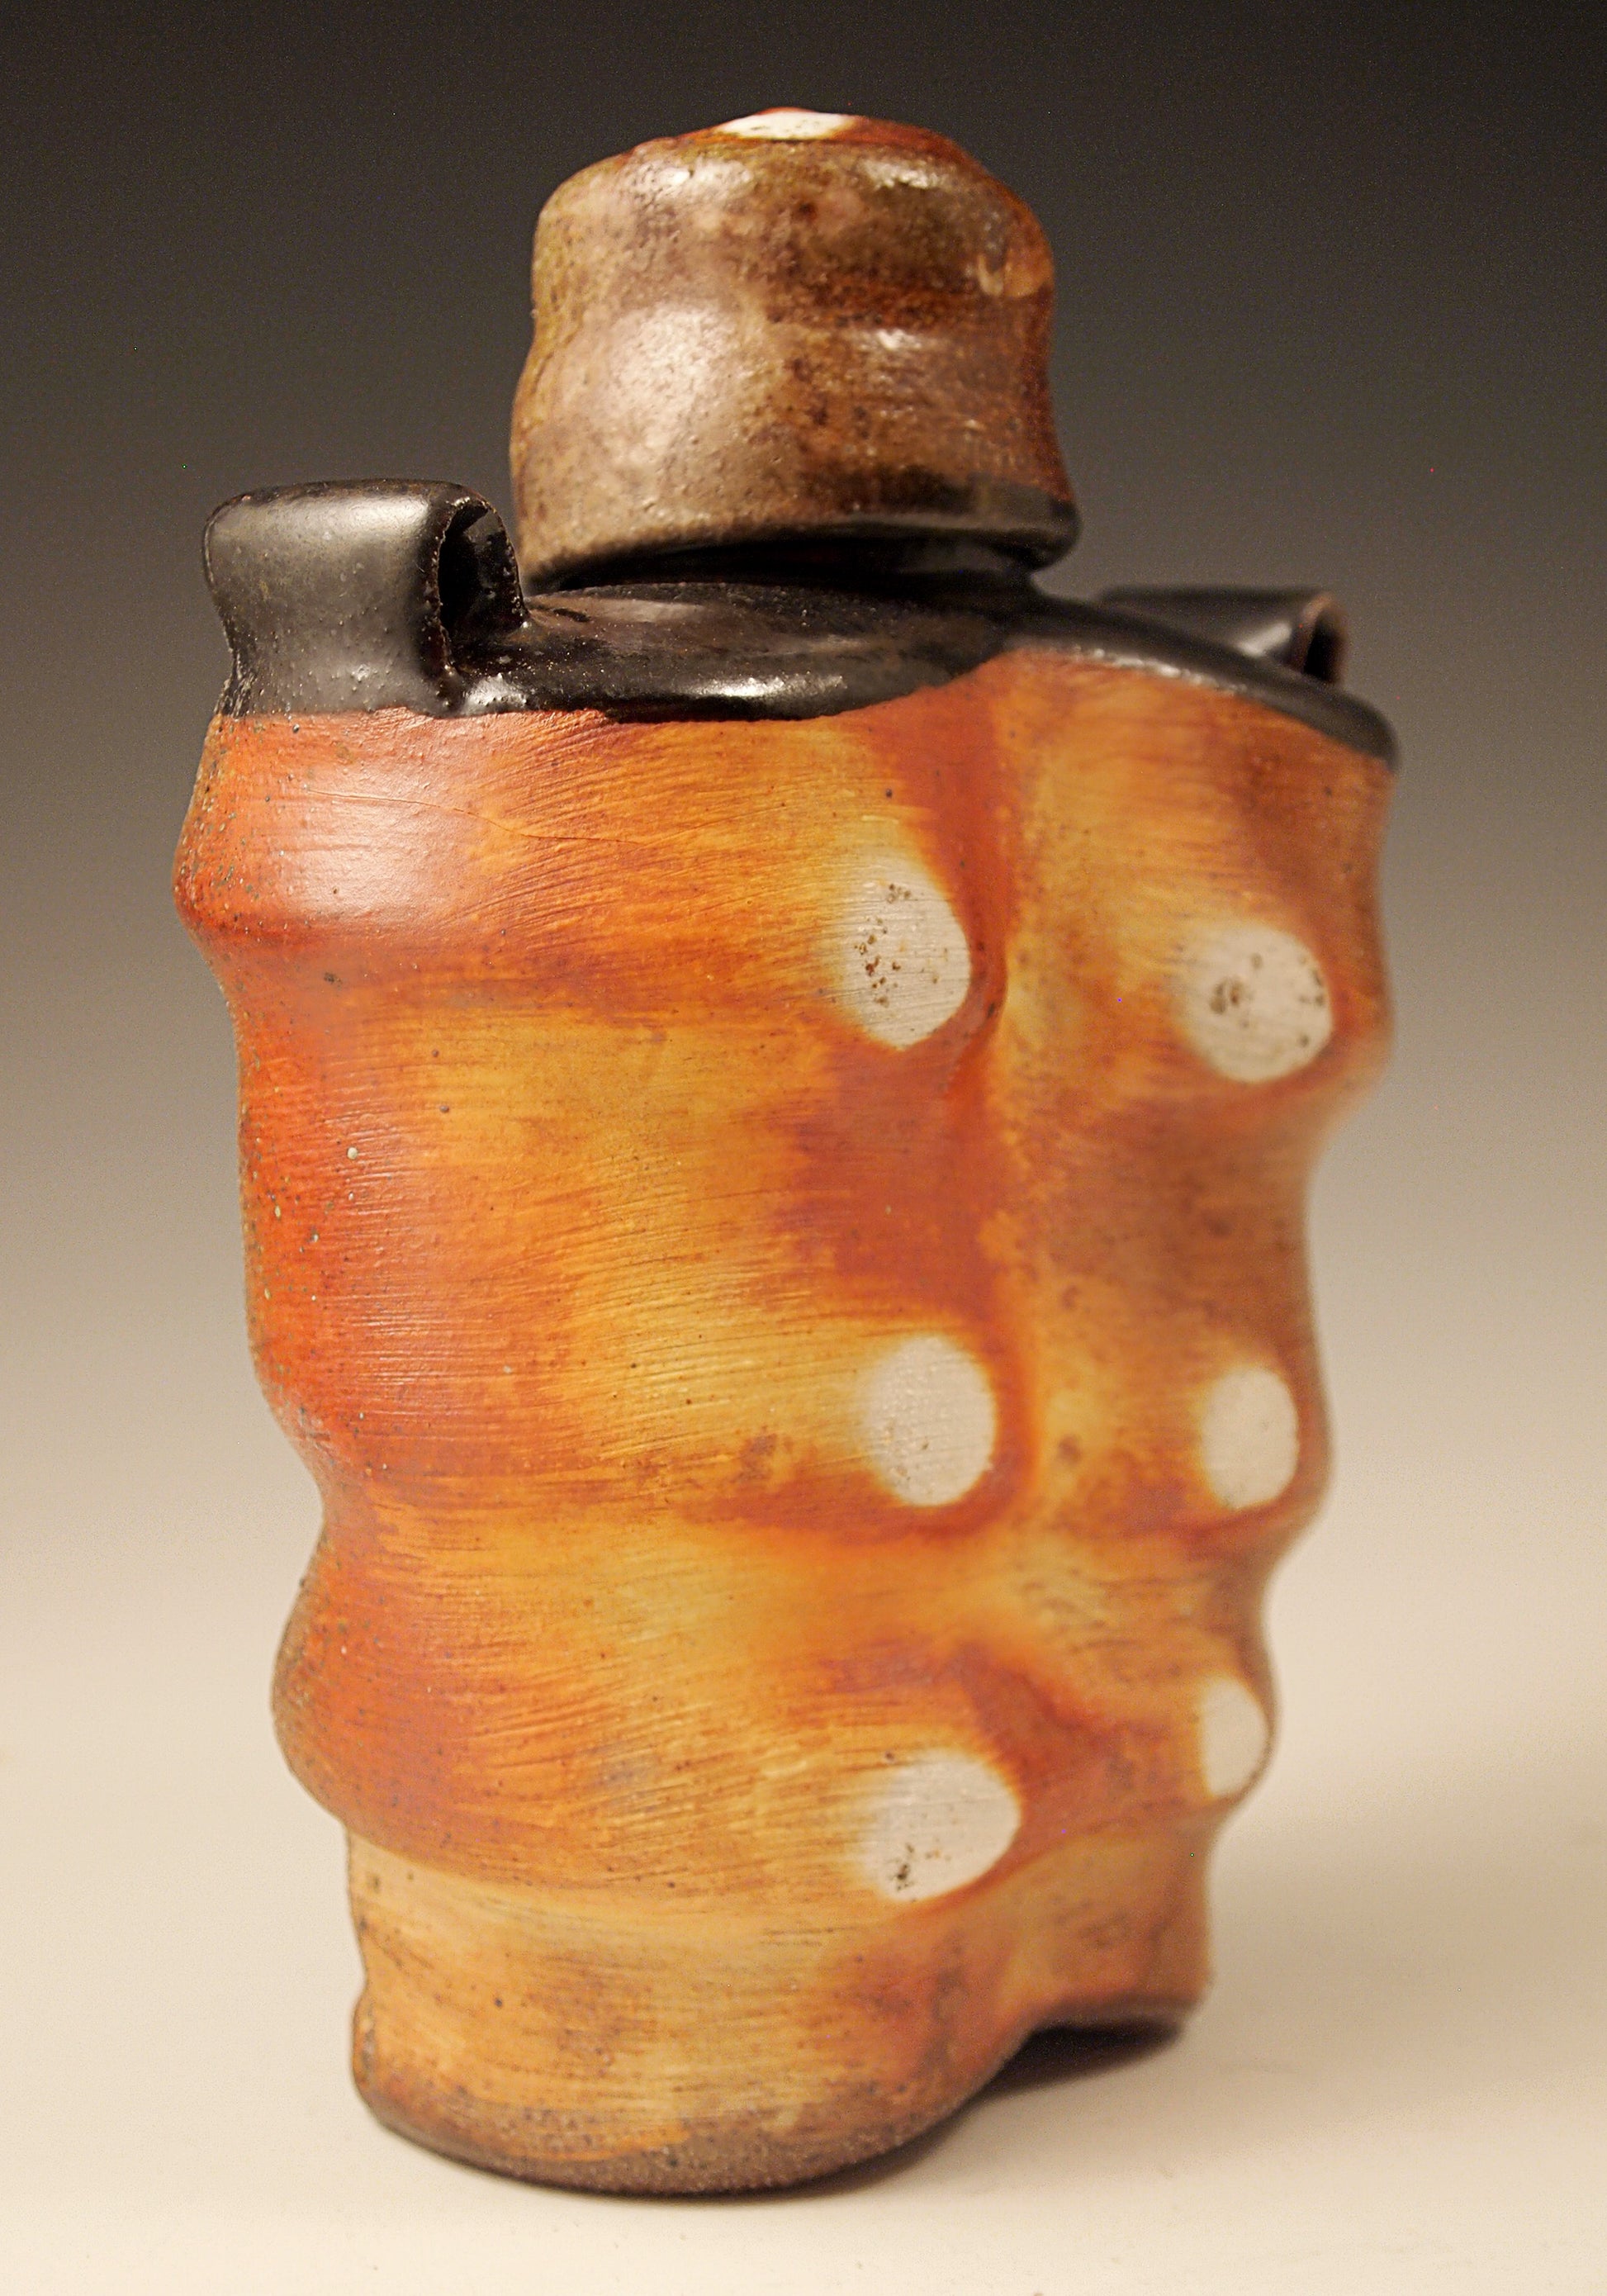 Wood-fired Stoneware Whiskey Flask with black liner glaze and black shoulders. Handmade. One-of-a-kind ceramic flask. 7" tall. 5.5" wide. 3" deep.  Side view.